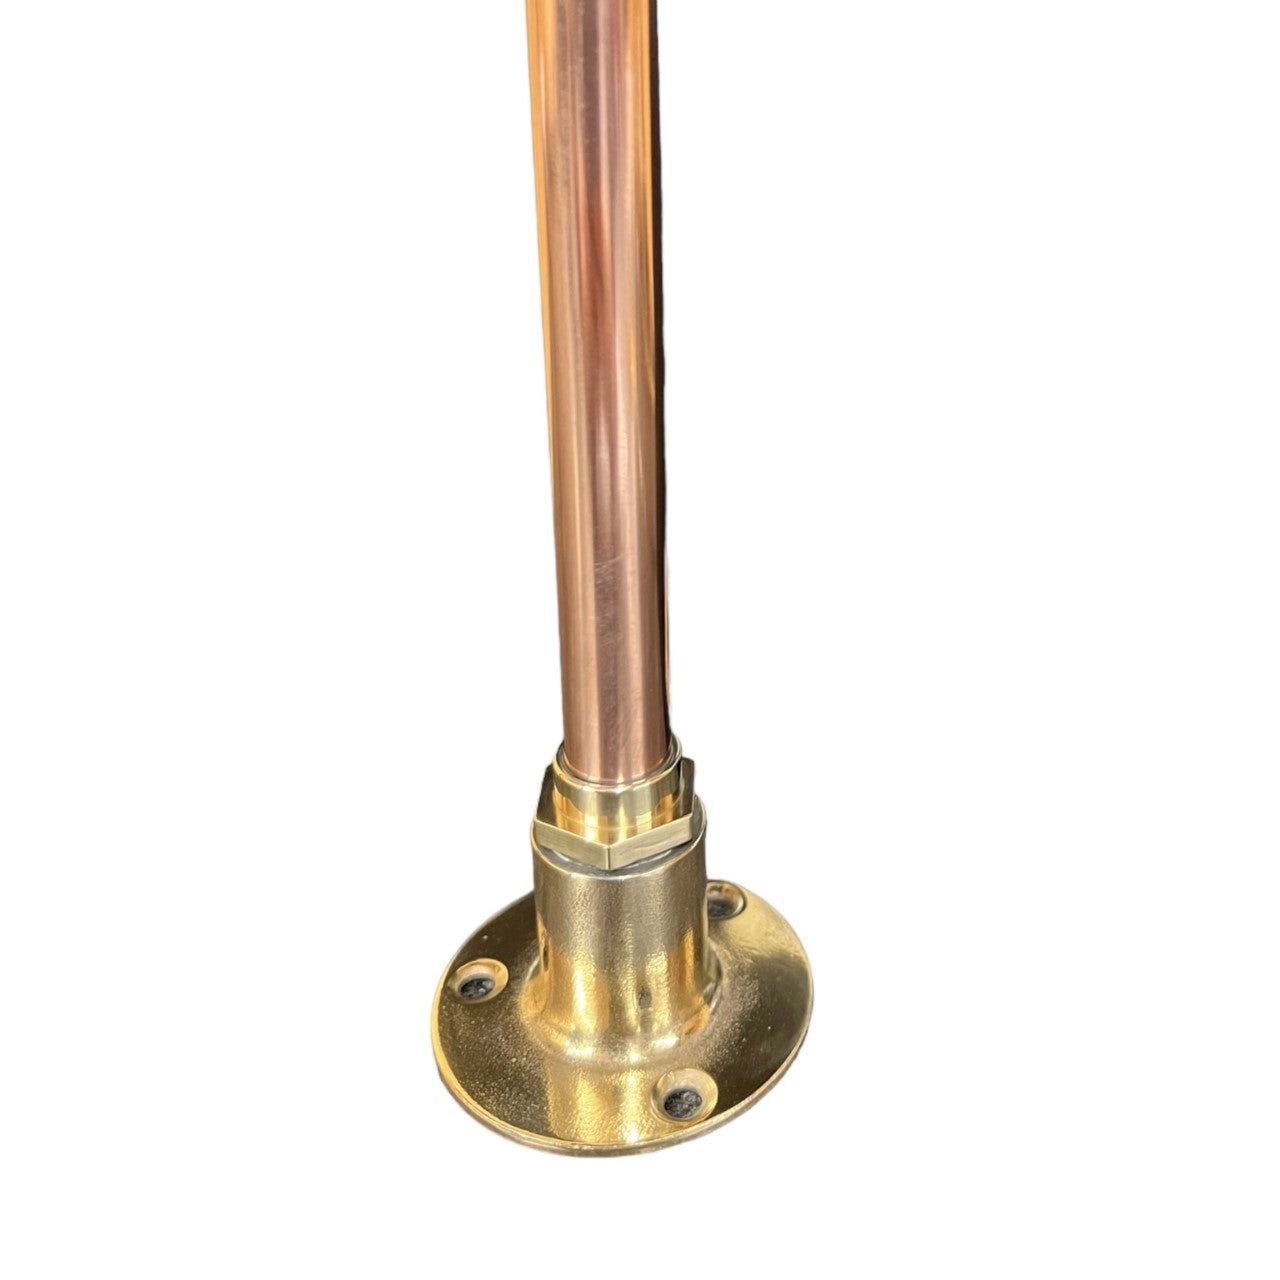 Vintage style brass and copper tap with brass mount sold by All Things French Store